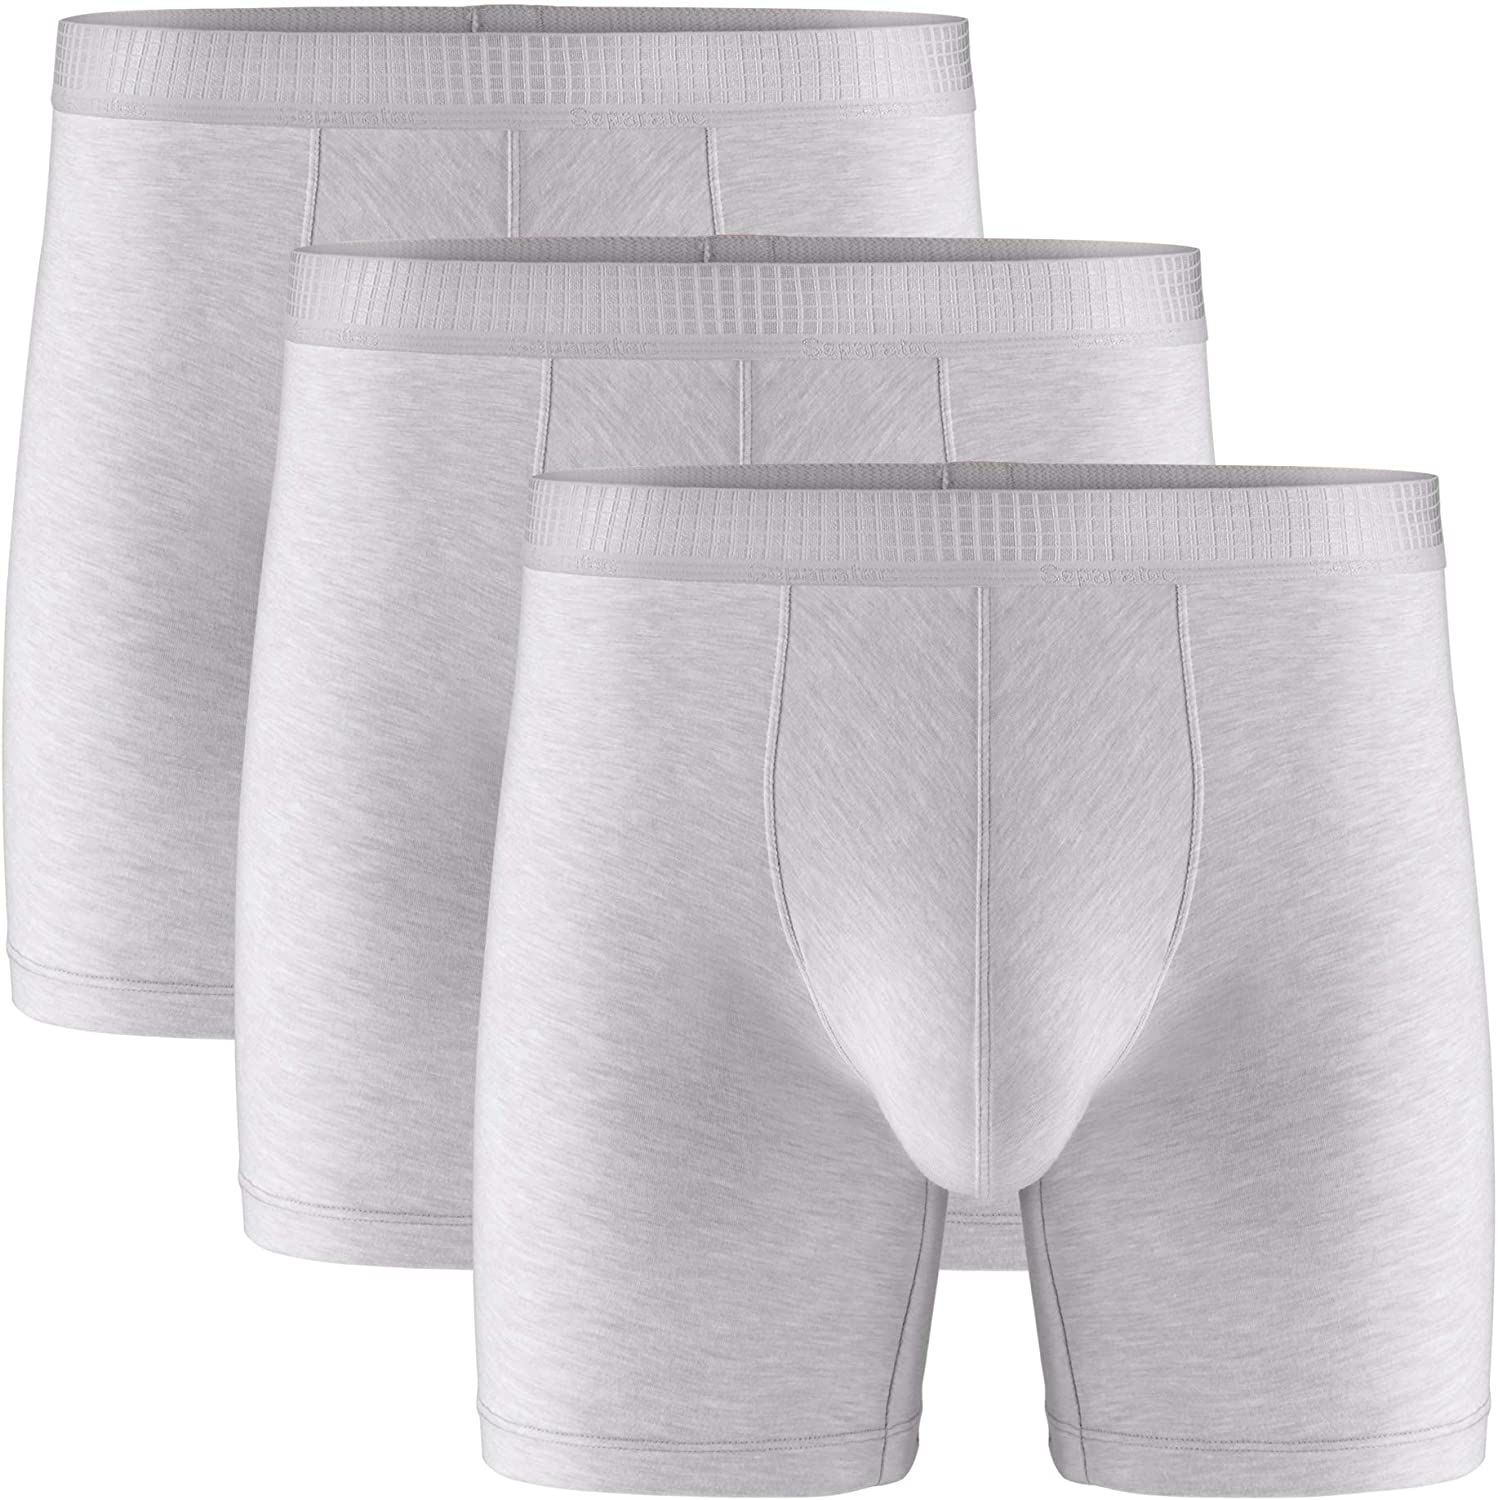 Separatec Men's 3 Pack Micro Modal Separate Pouches Comfort Fit